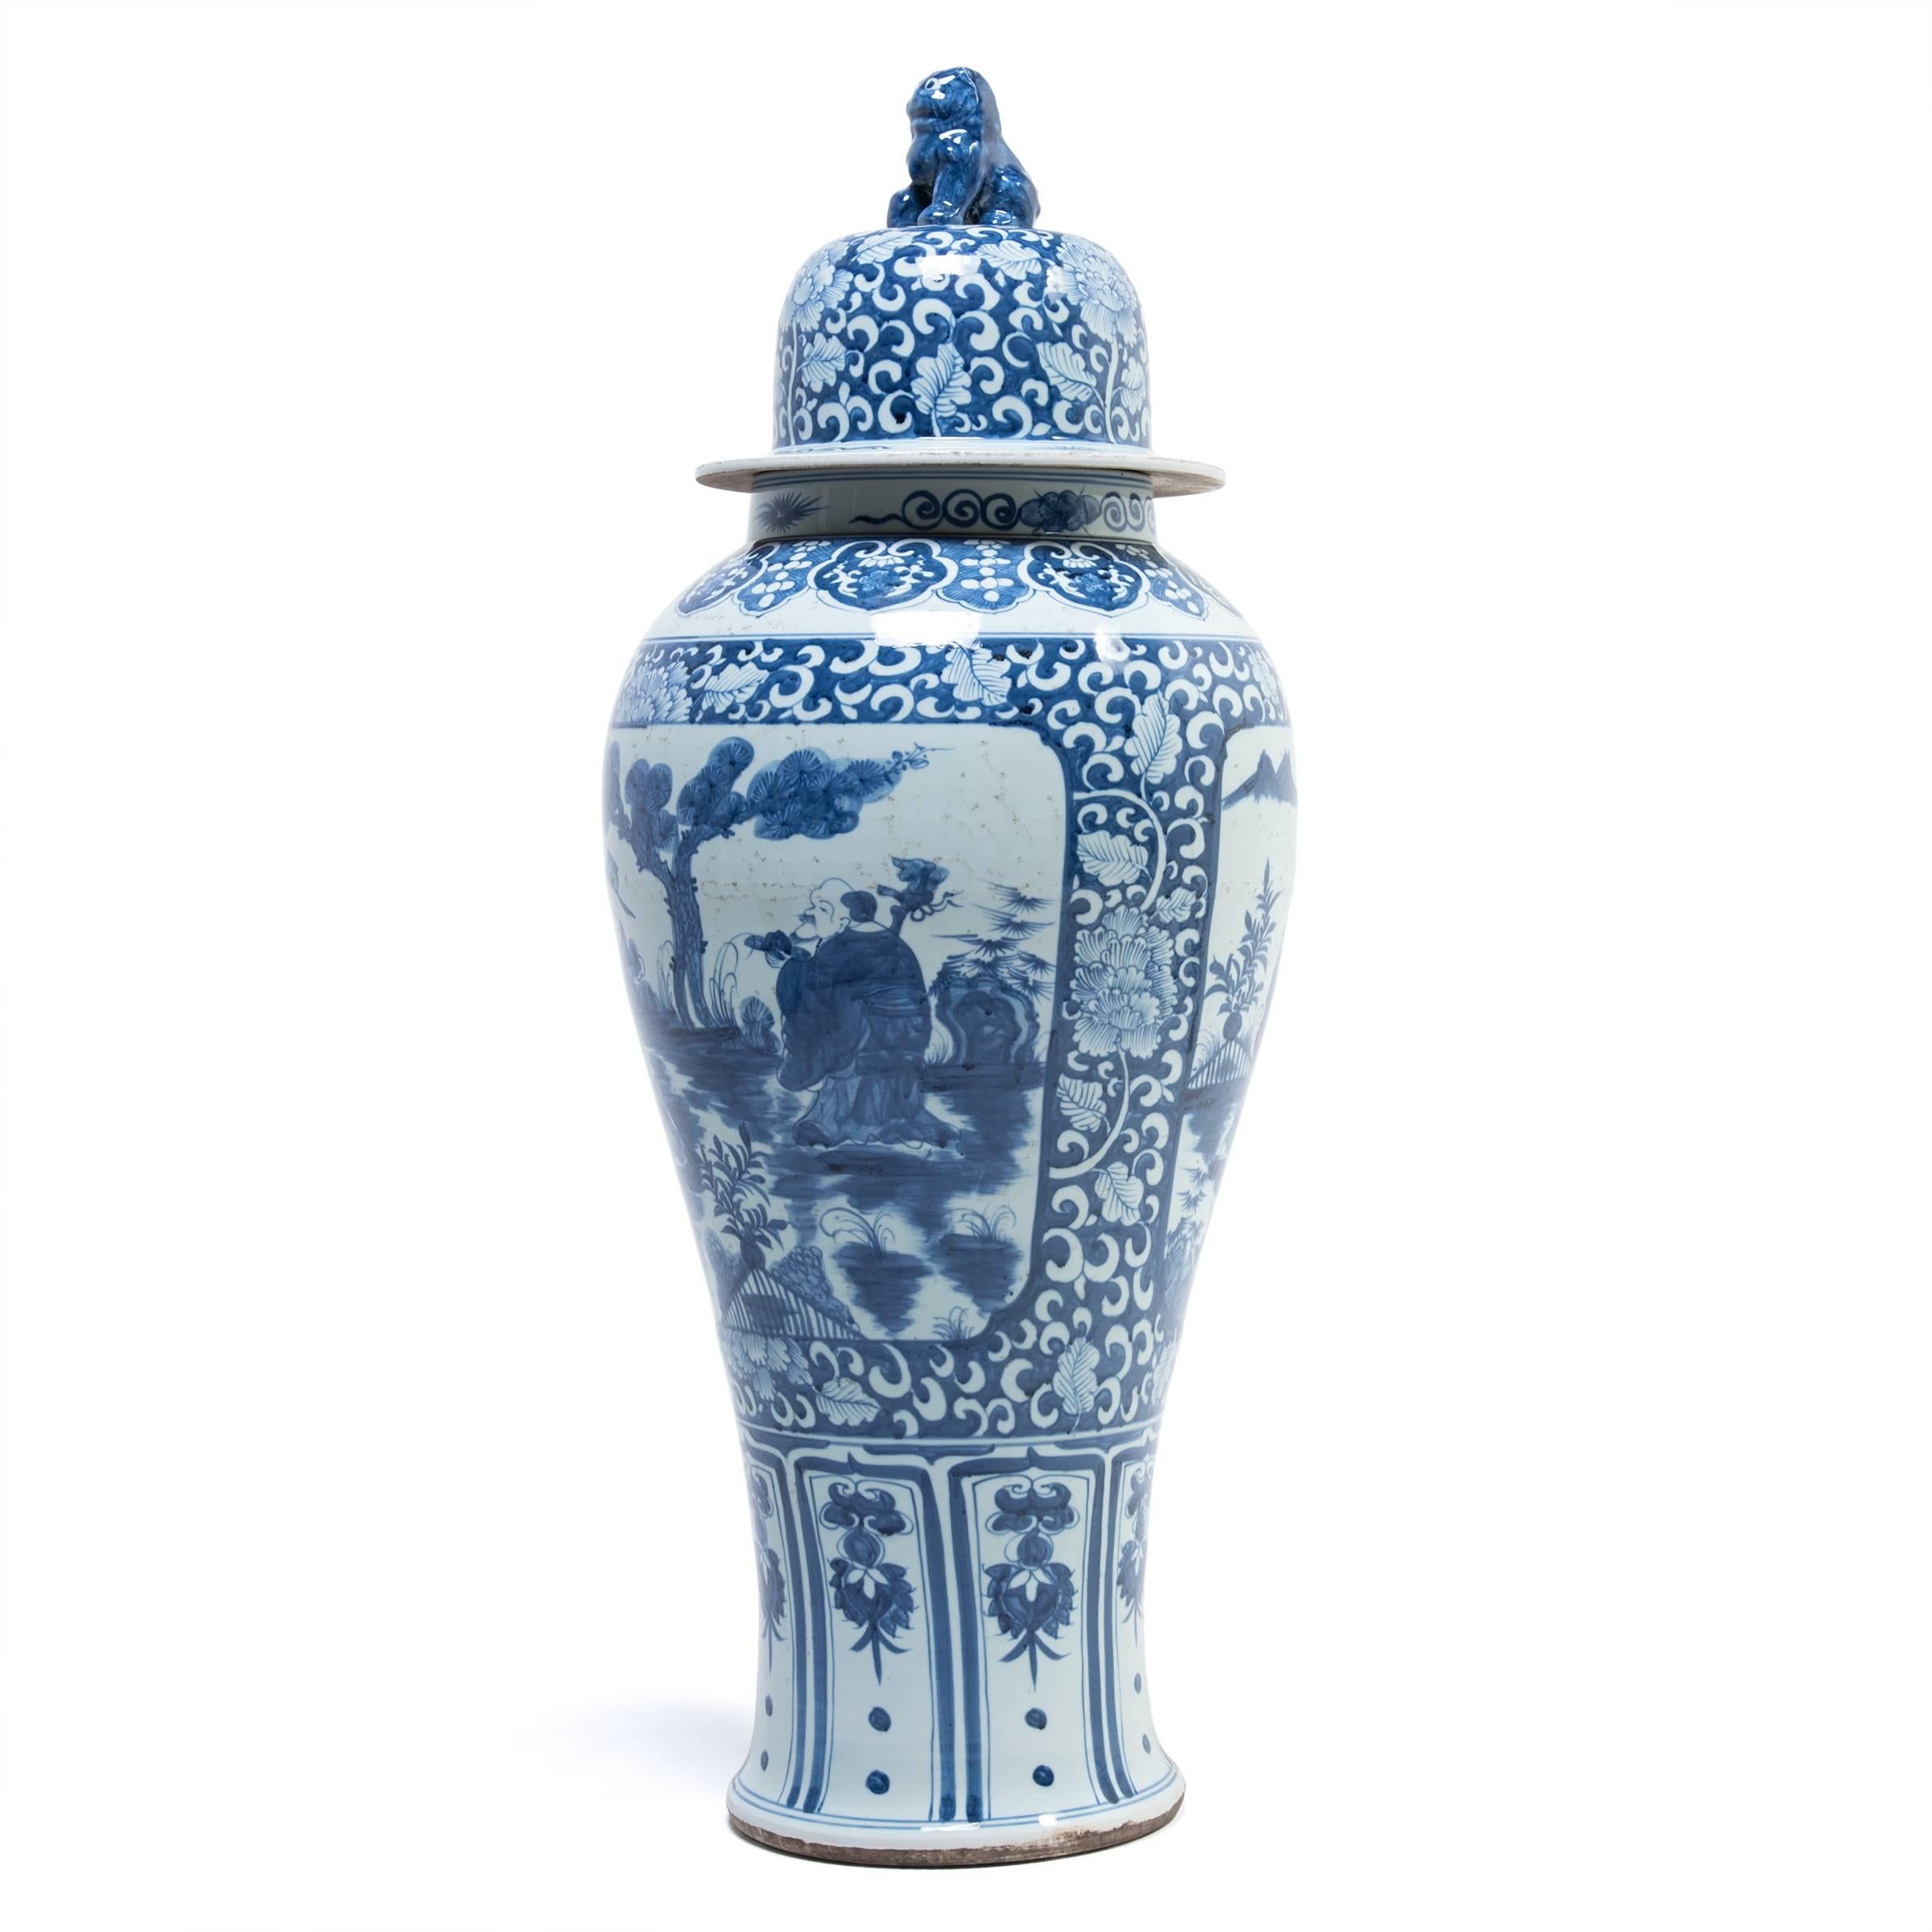 Chinese blue-and-white porcelain has inspired ceramists worldwide since cobalt was first introduced to China from the Middle East thousands of years ago. This contemporary version of a traditional ginger jar made in Jiangxi province showcases the